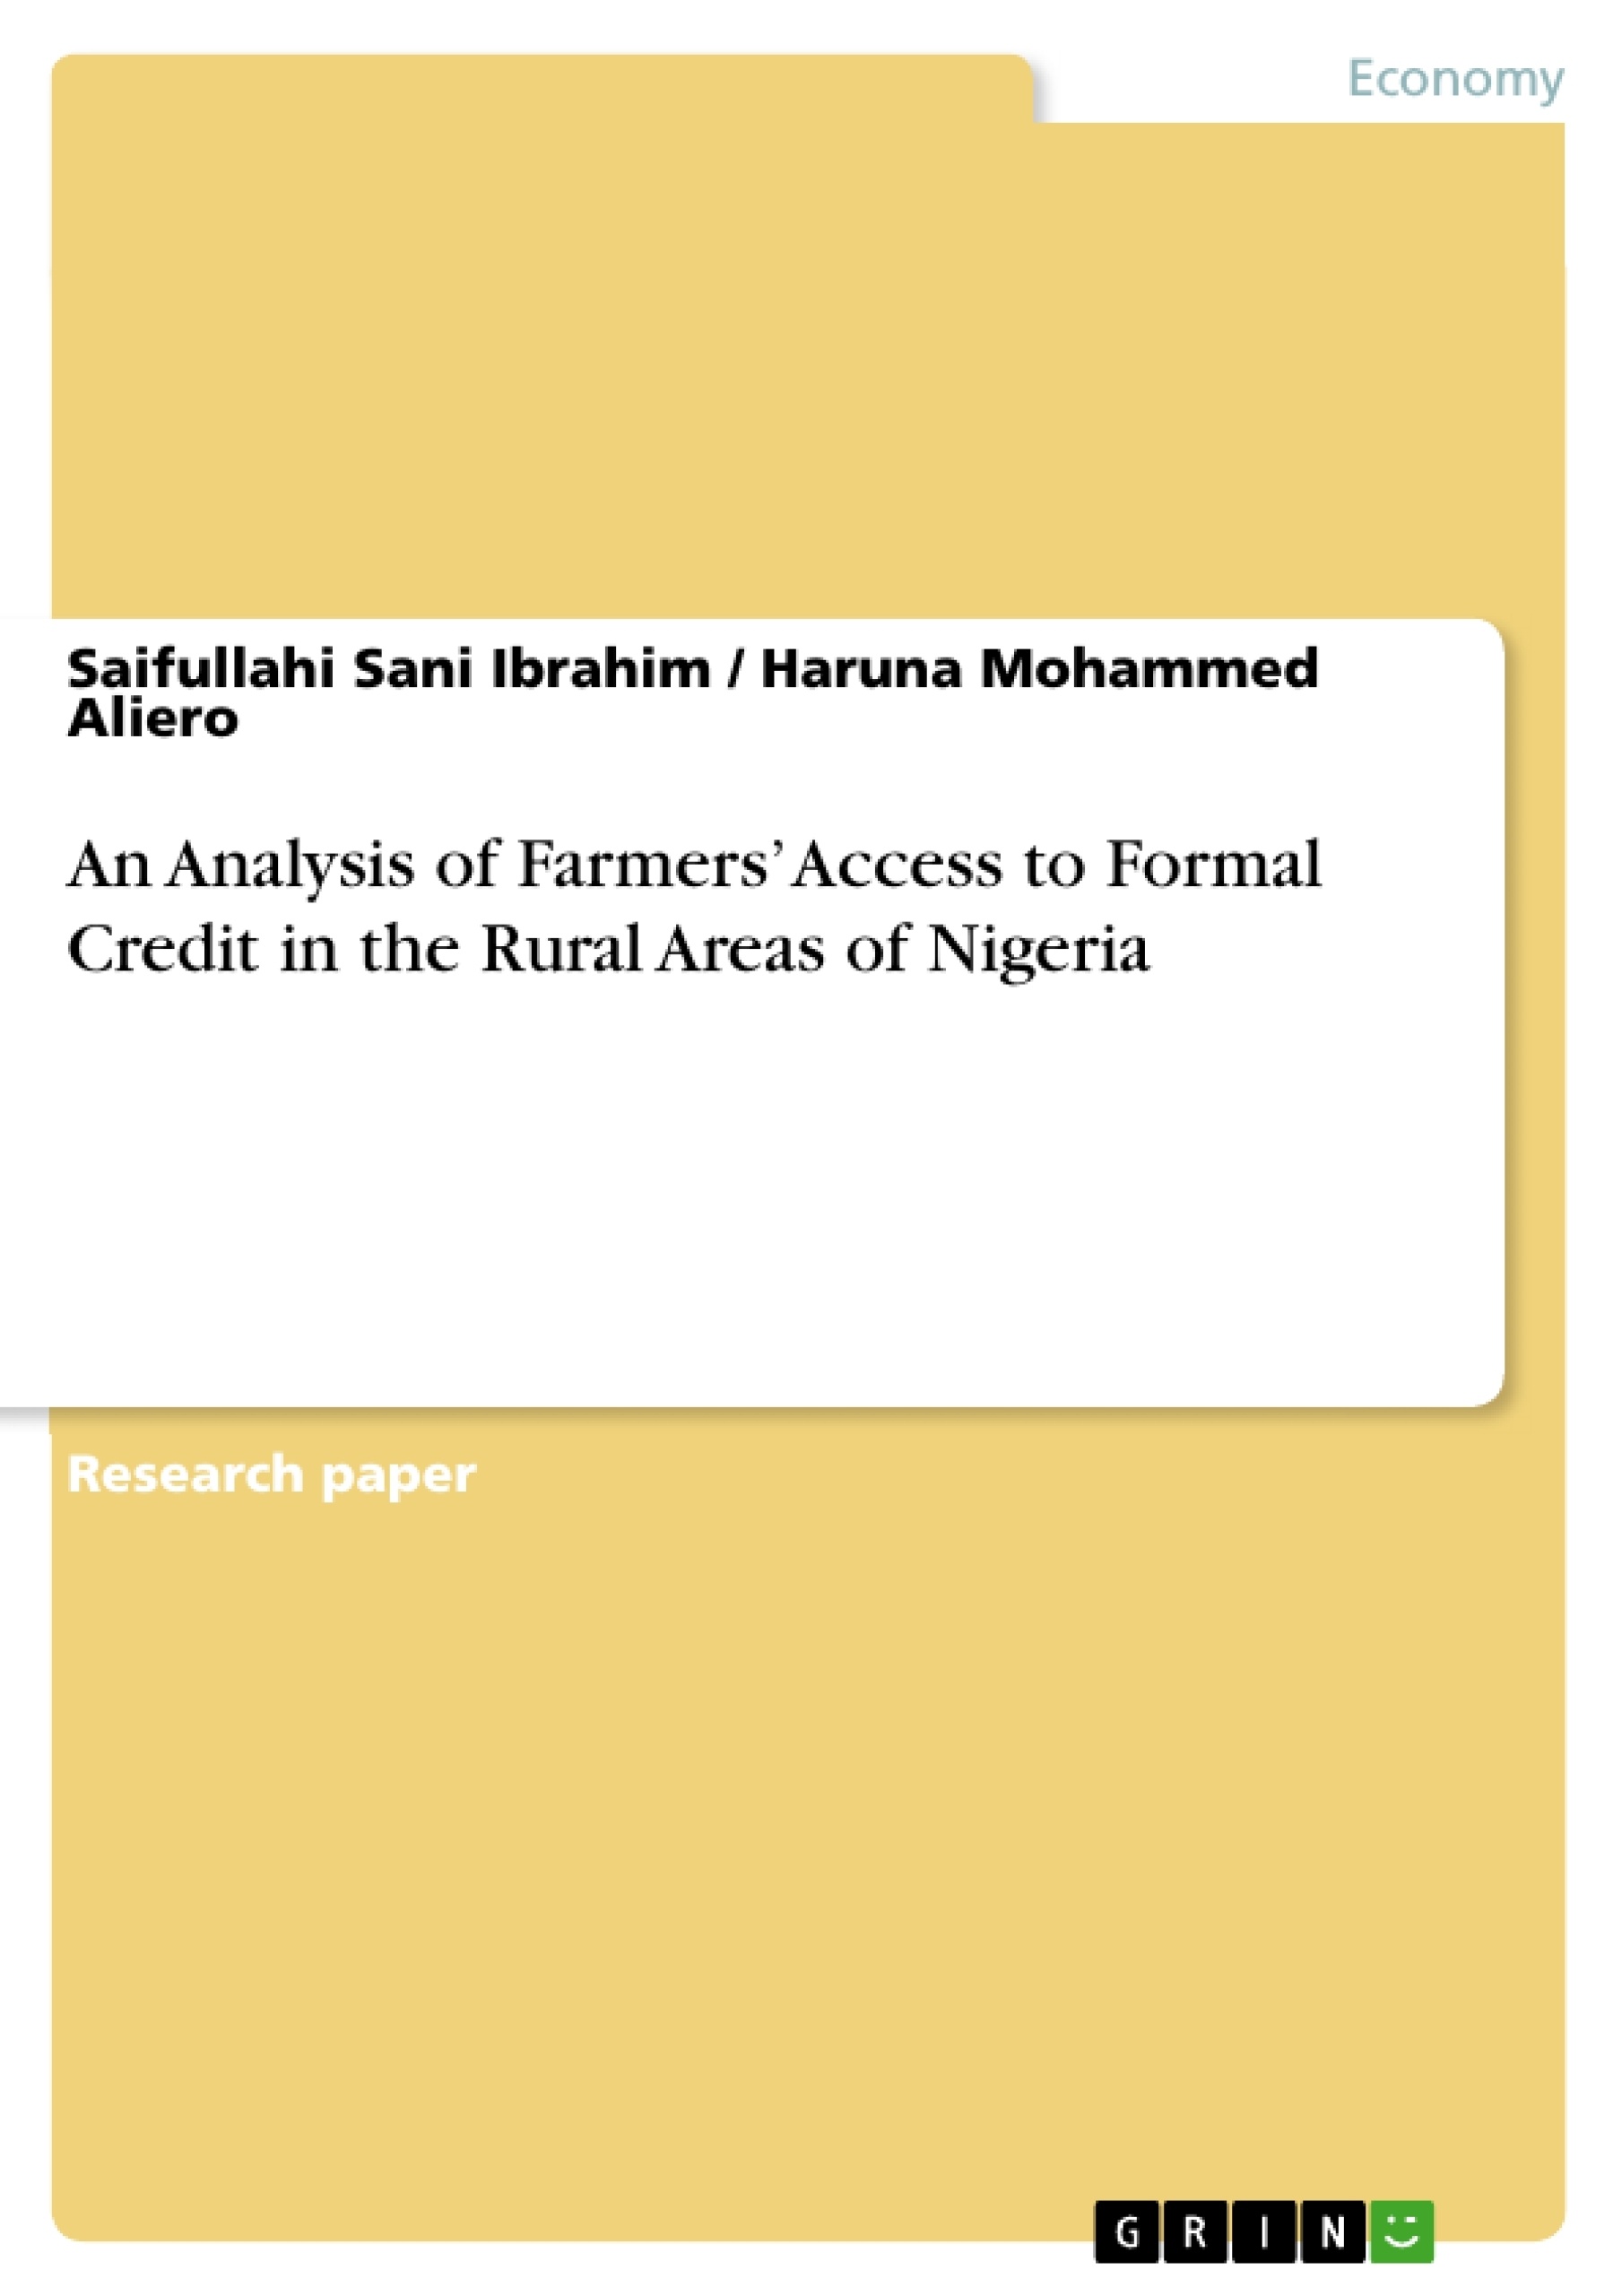 Título: An Analysis of Farmers’ Access to Formal Credit in the Rural Areas of Nigeria